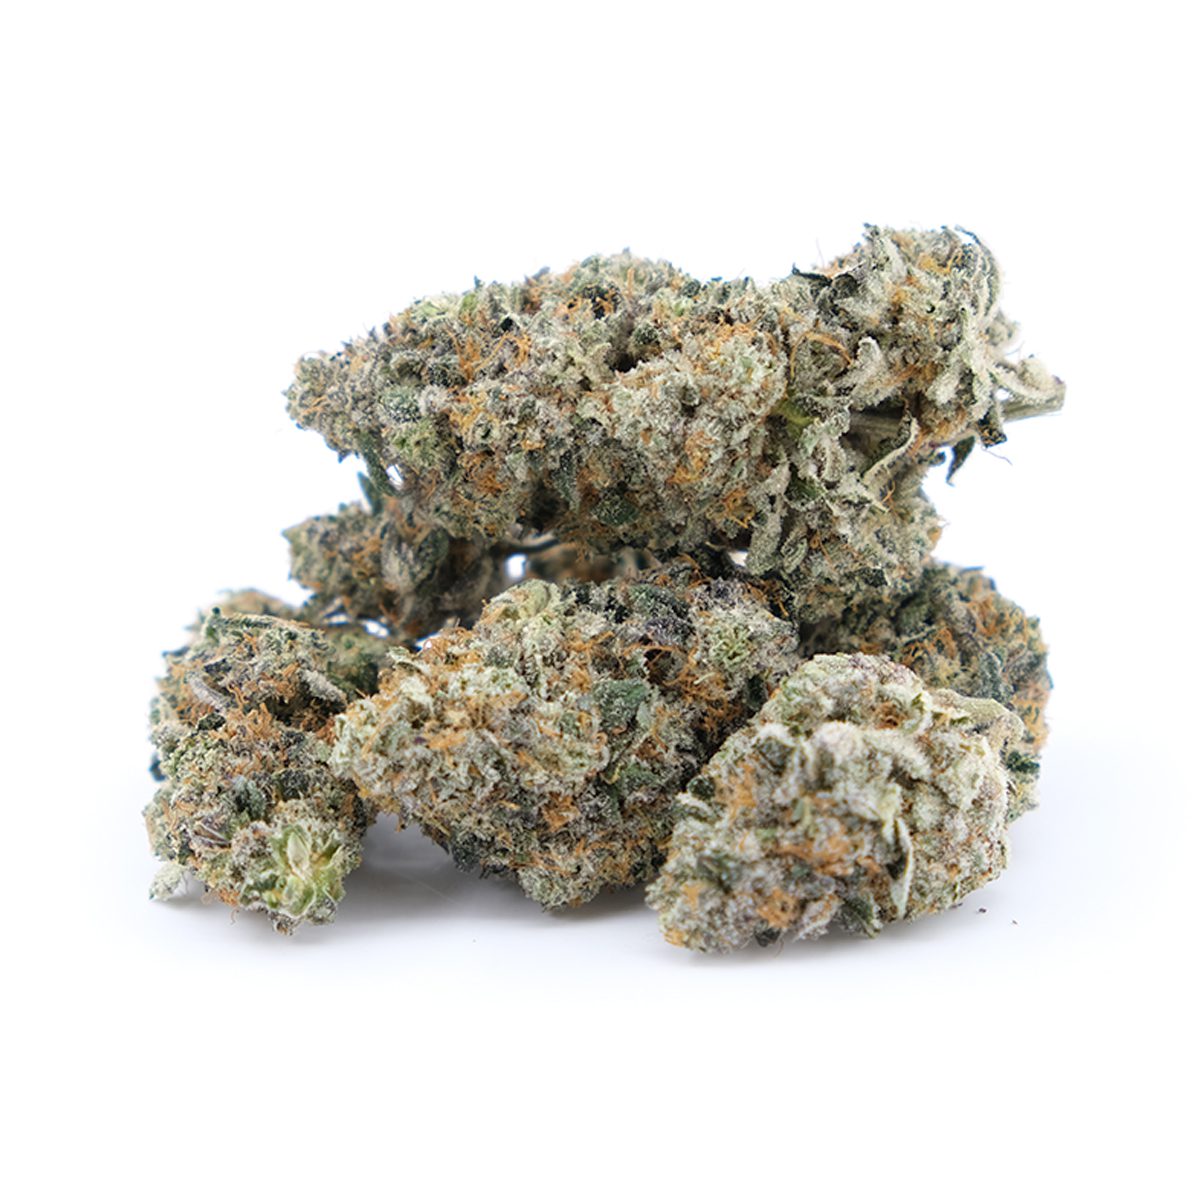 *NEW* Whole Sale Strains Added!! Save On Quantity!! NEW EXOTICS!!